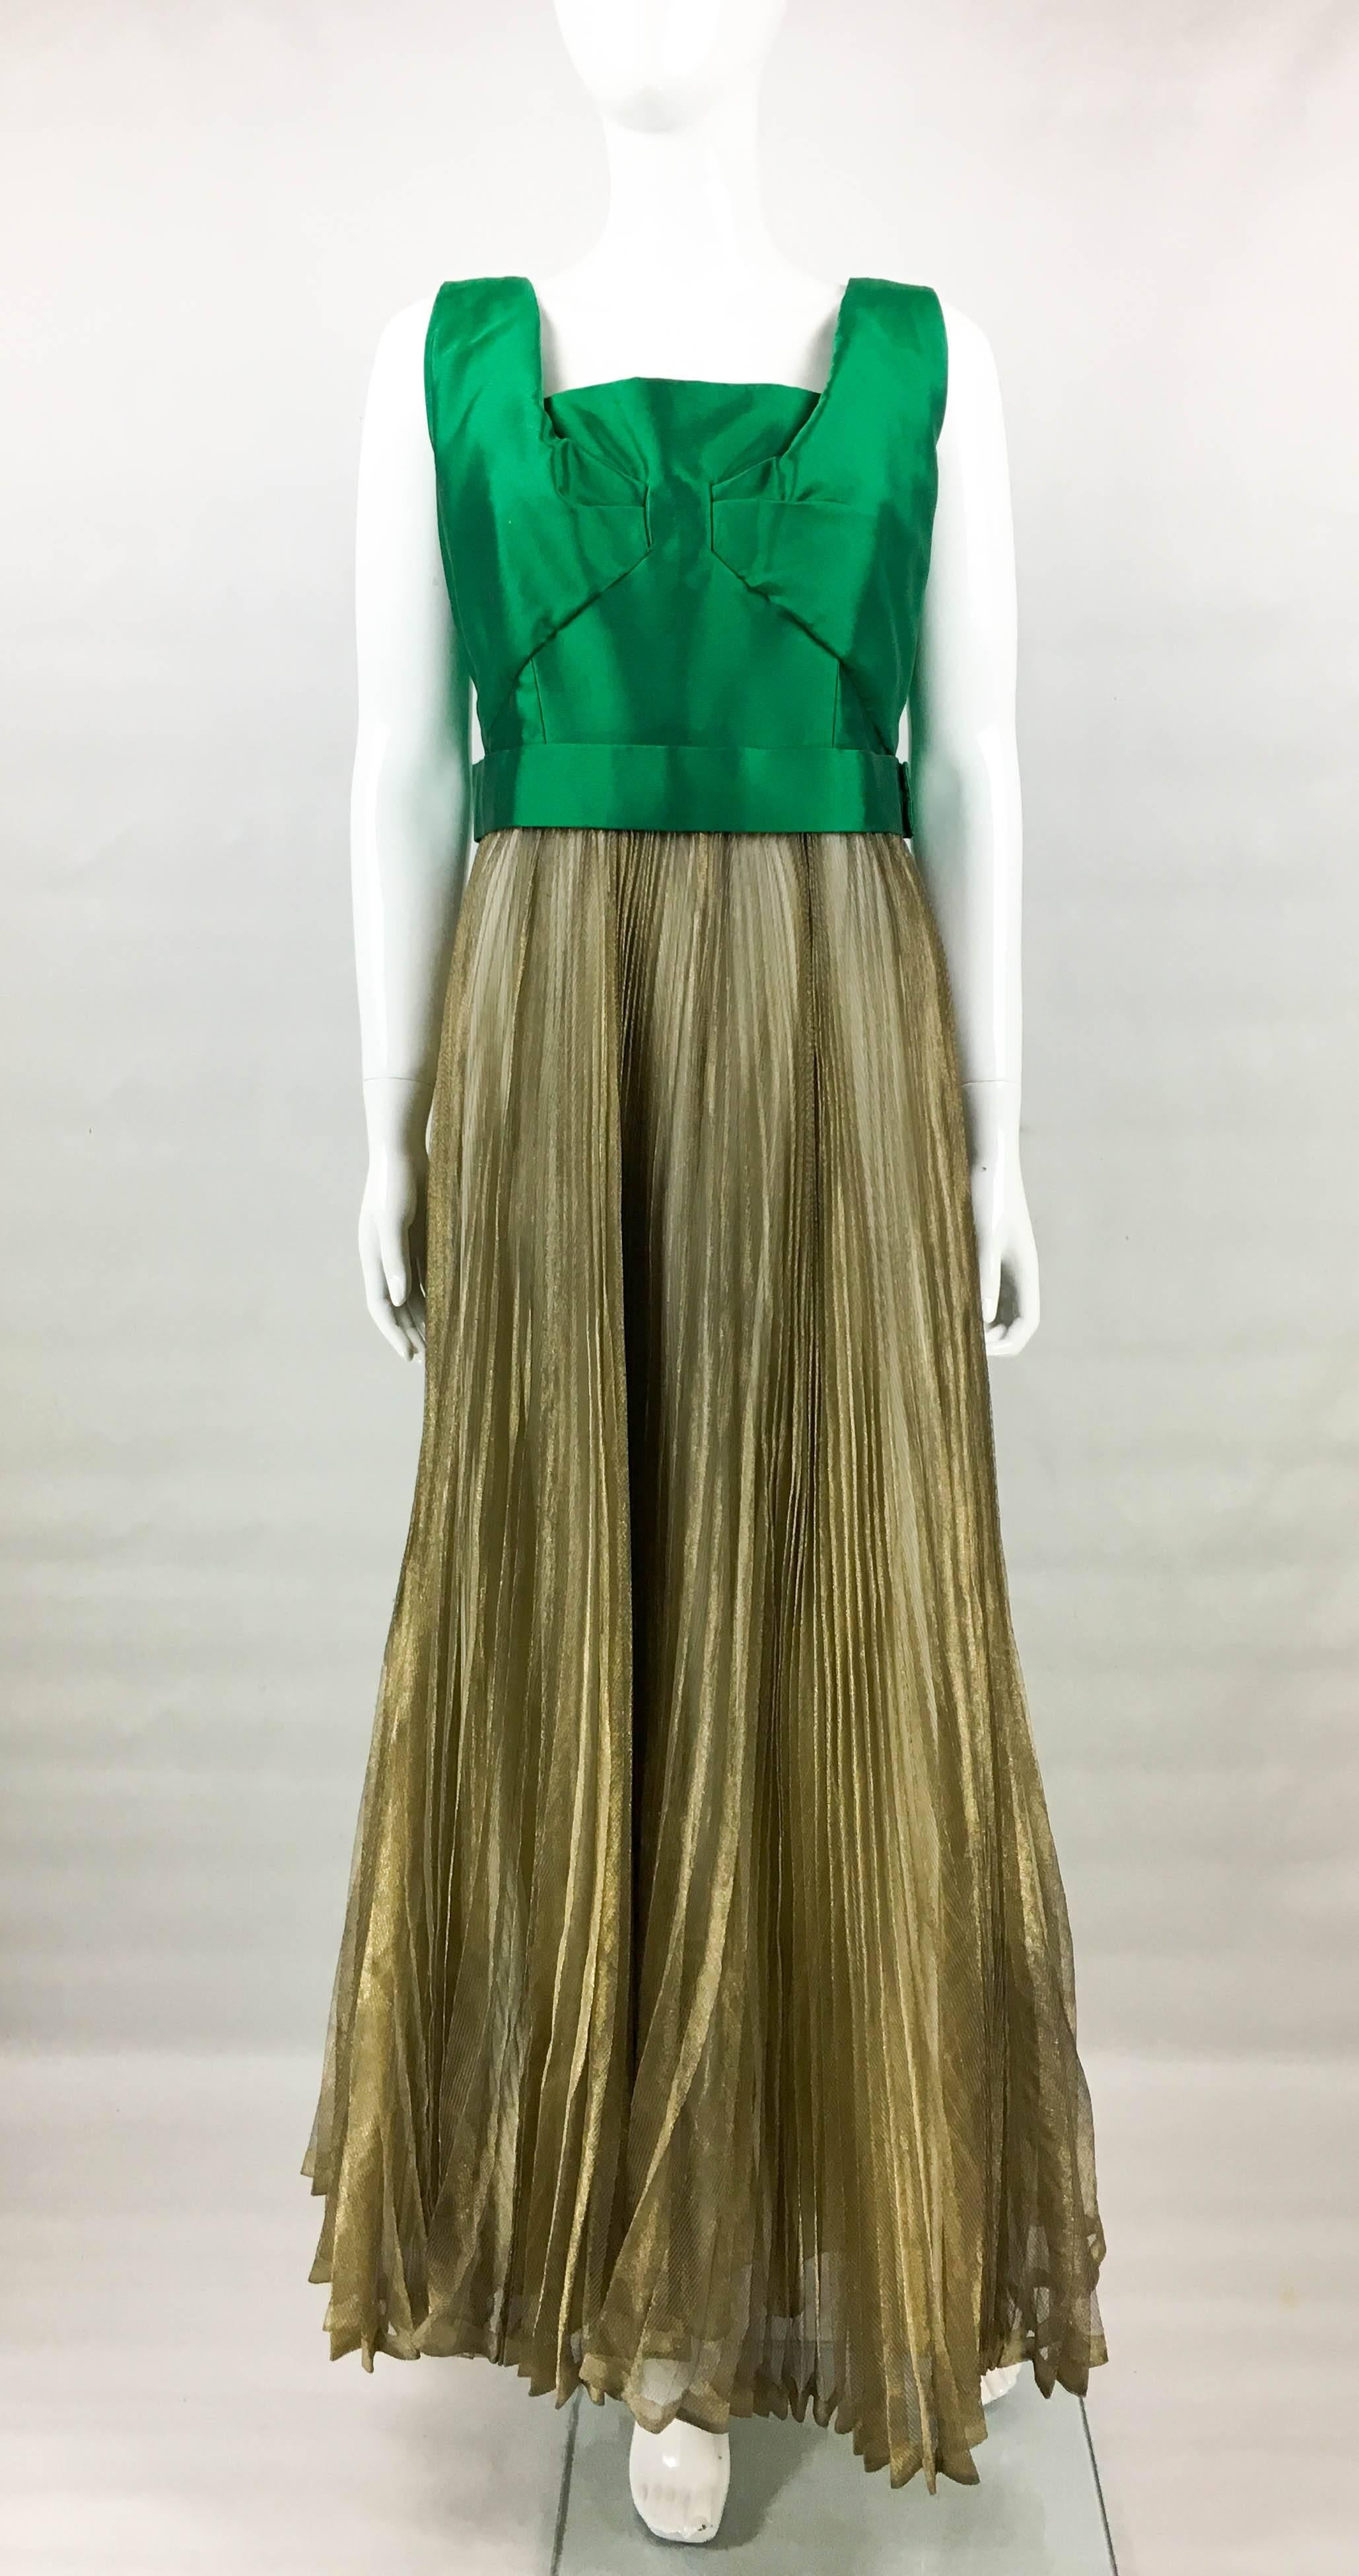 Black Lanvin Haute Couture Green Gazar and Gold Lame Pleated Gown, early 1960s For Sale